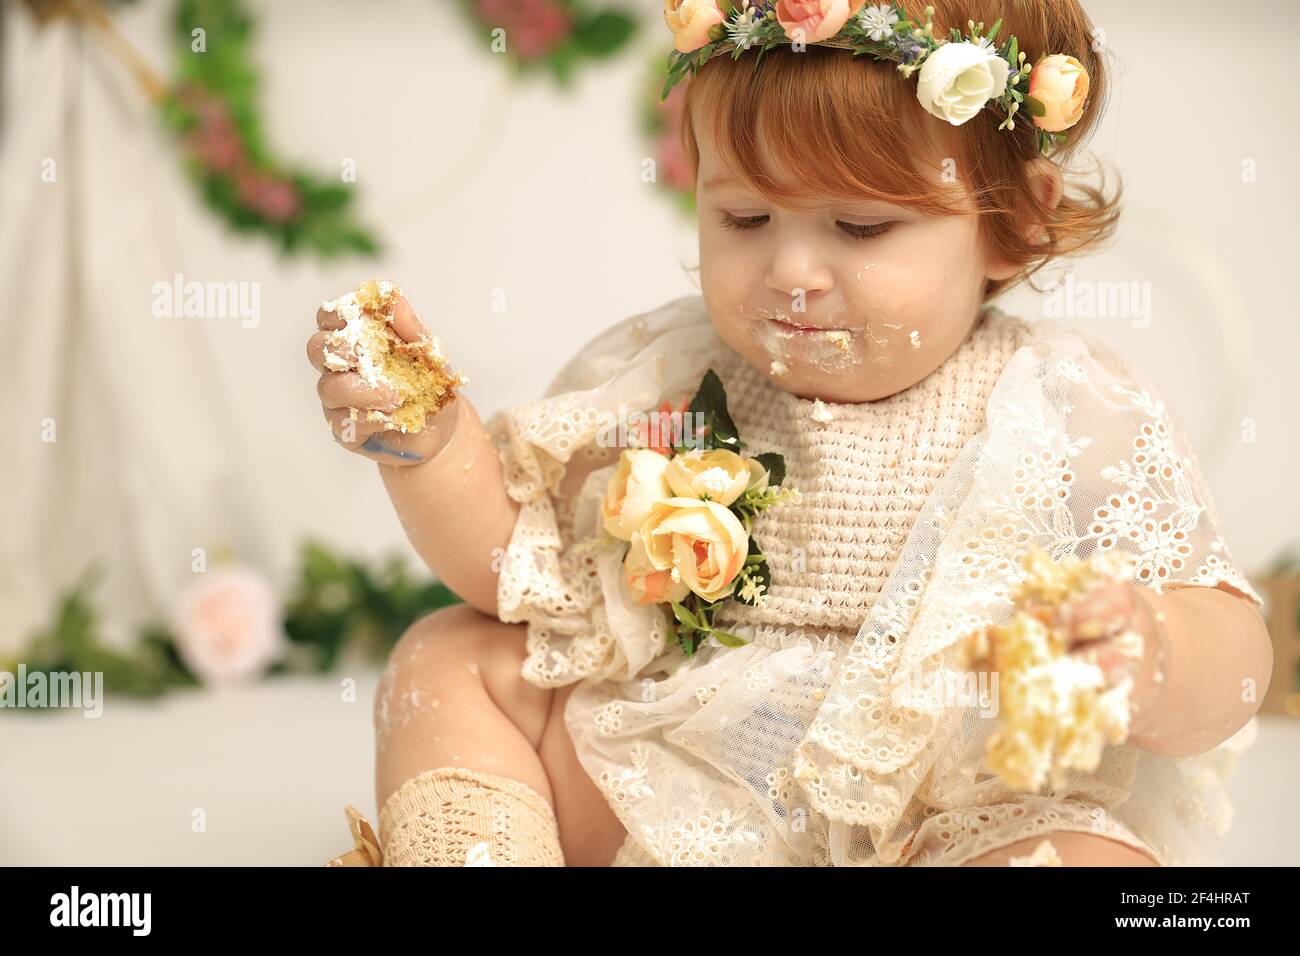 cute red haired baby girl smashes her first birthday cake Stock Photo